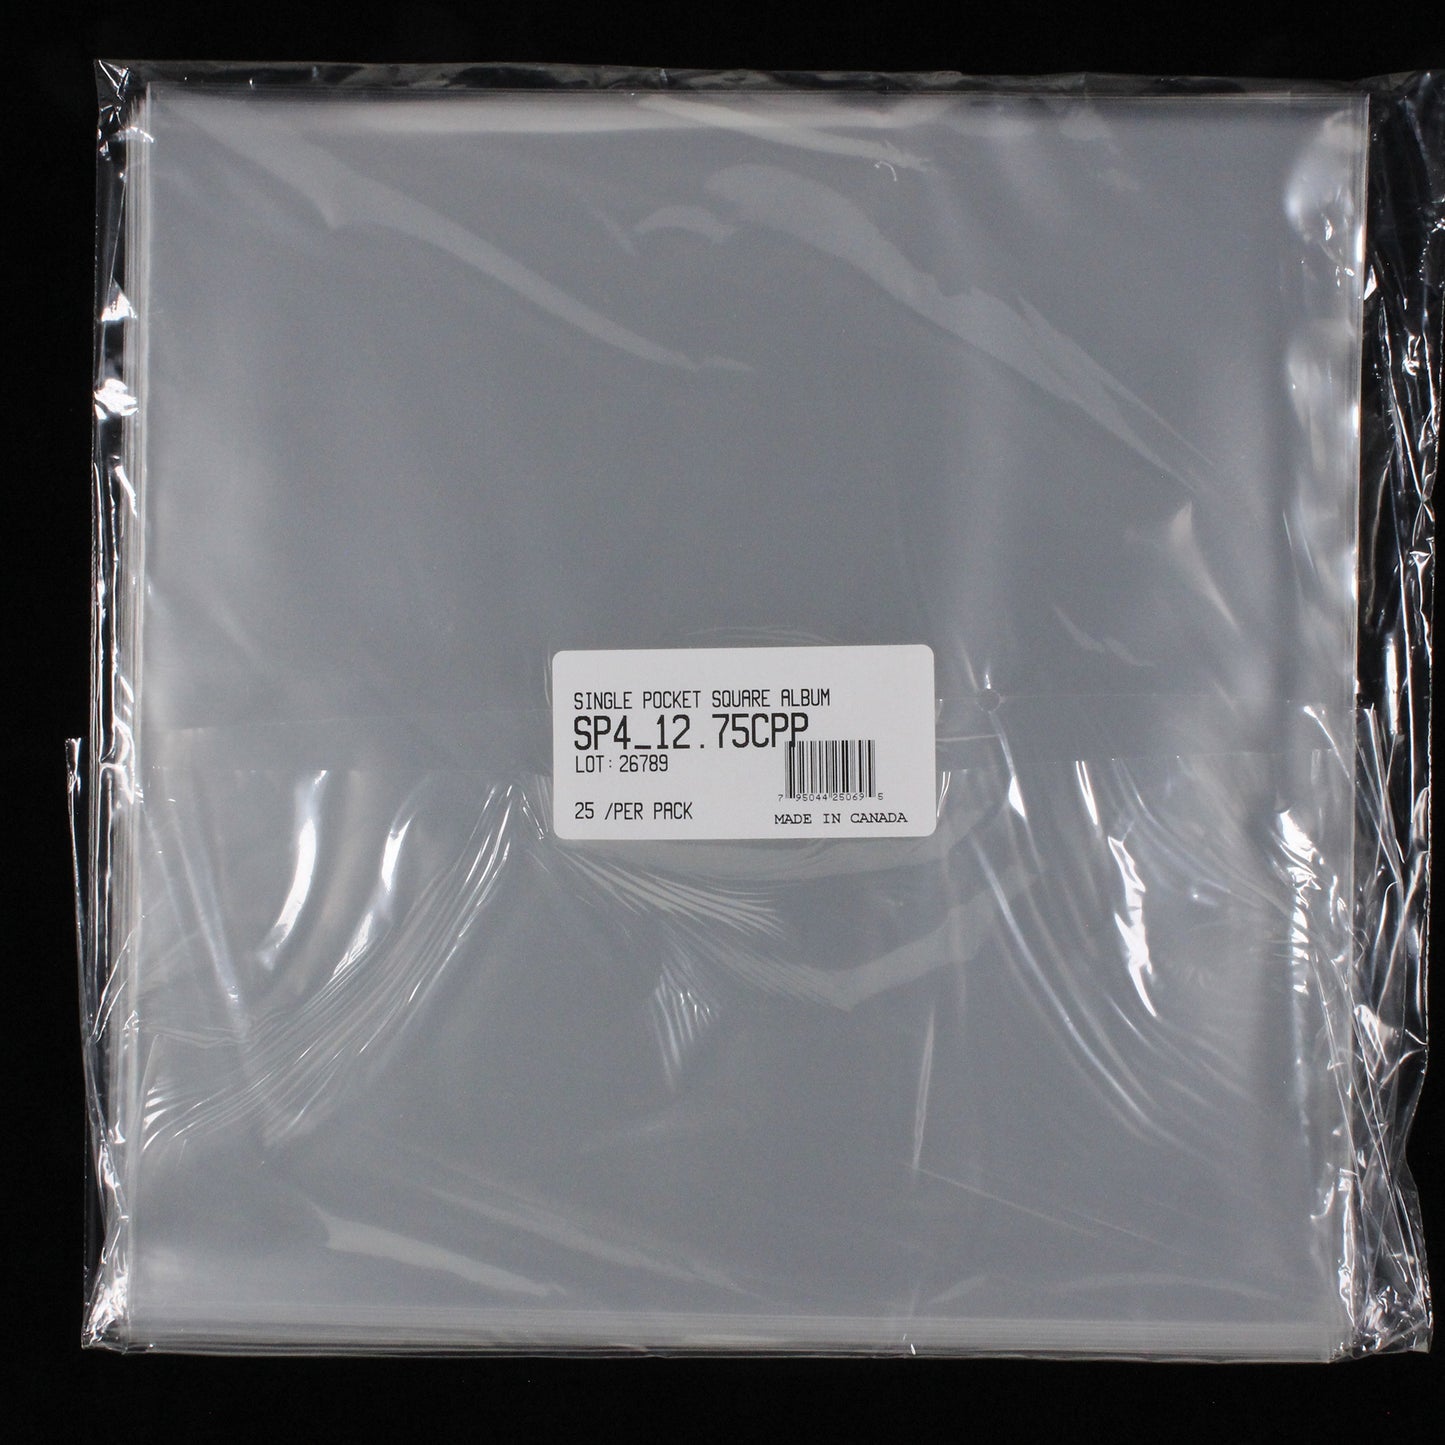 Vinyl Storage Solutions - 12.75" Single Pocket Outer Sleeves w/ No Flap - 4mil (25 pack)